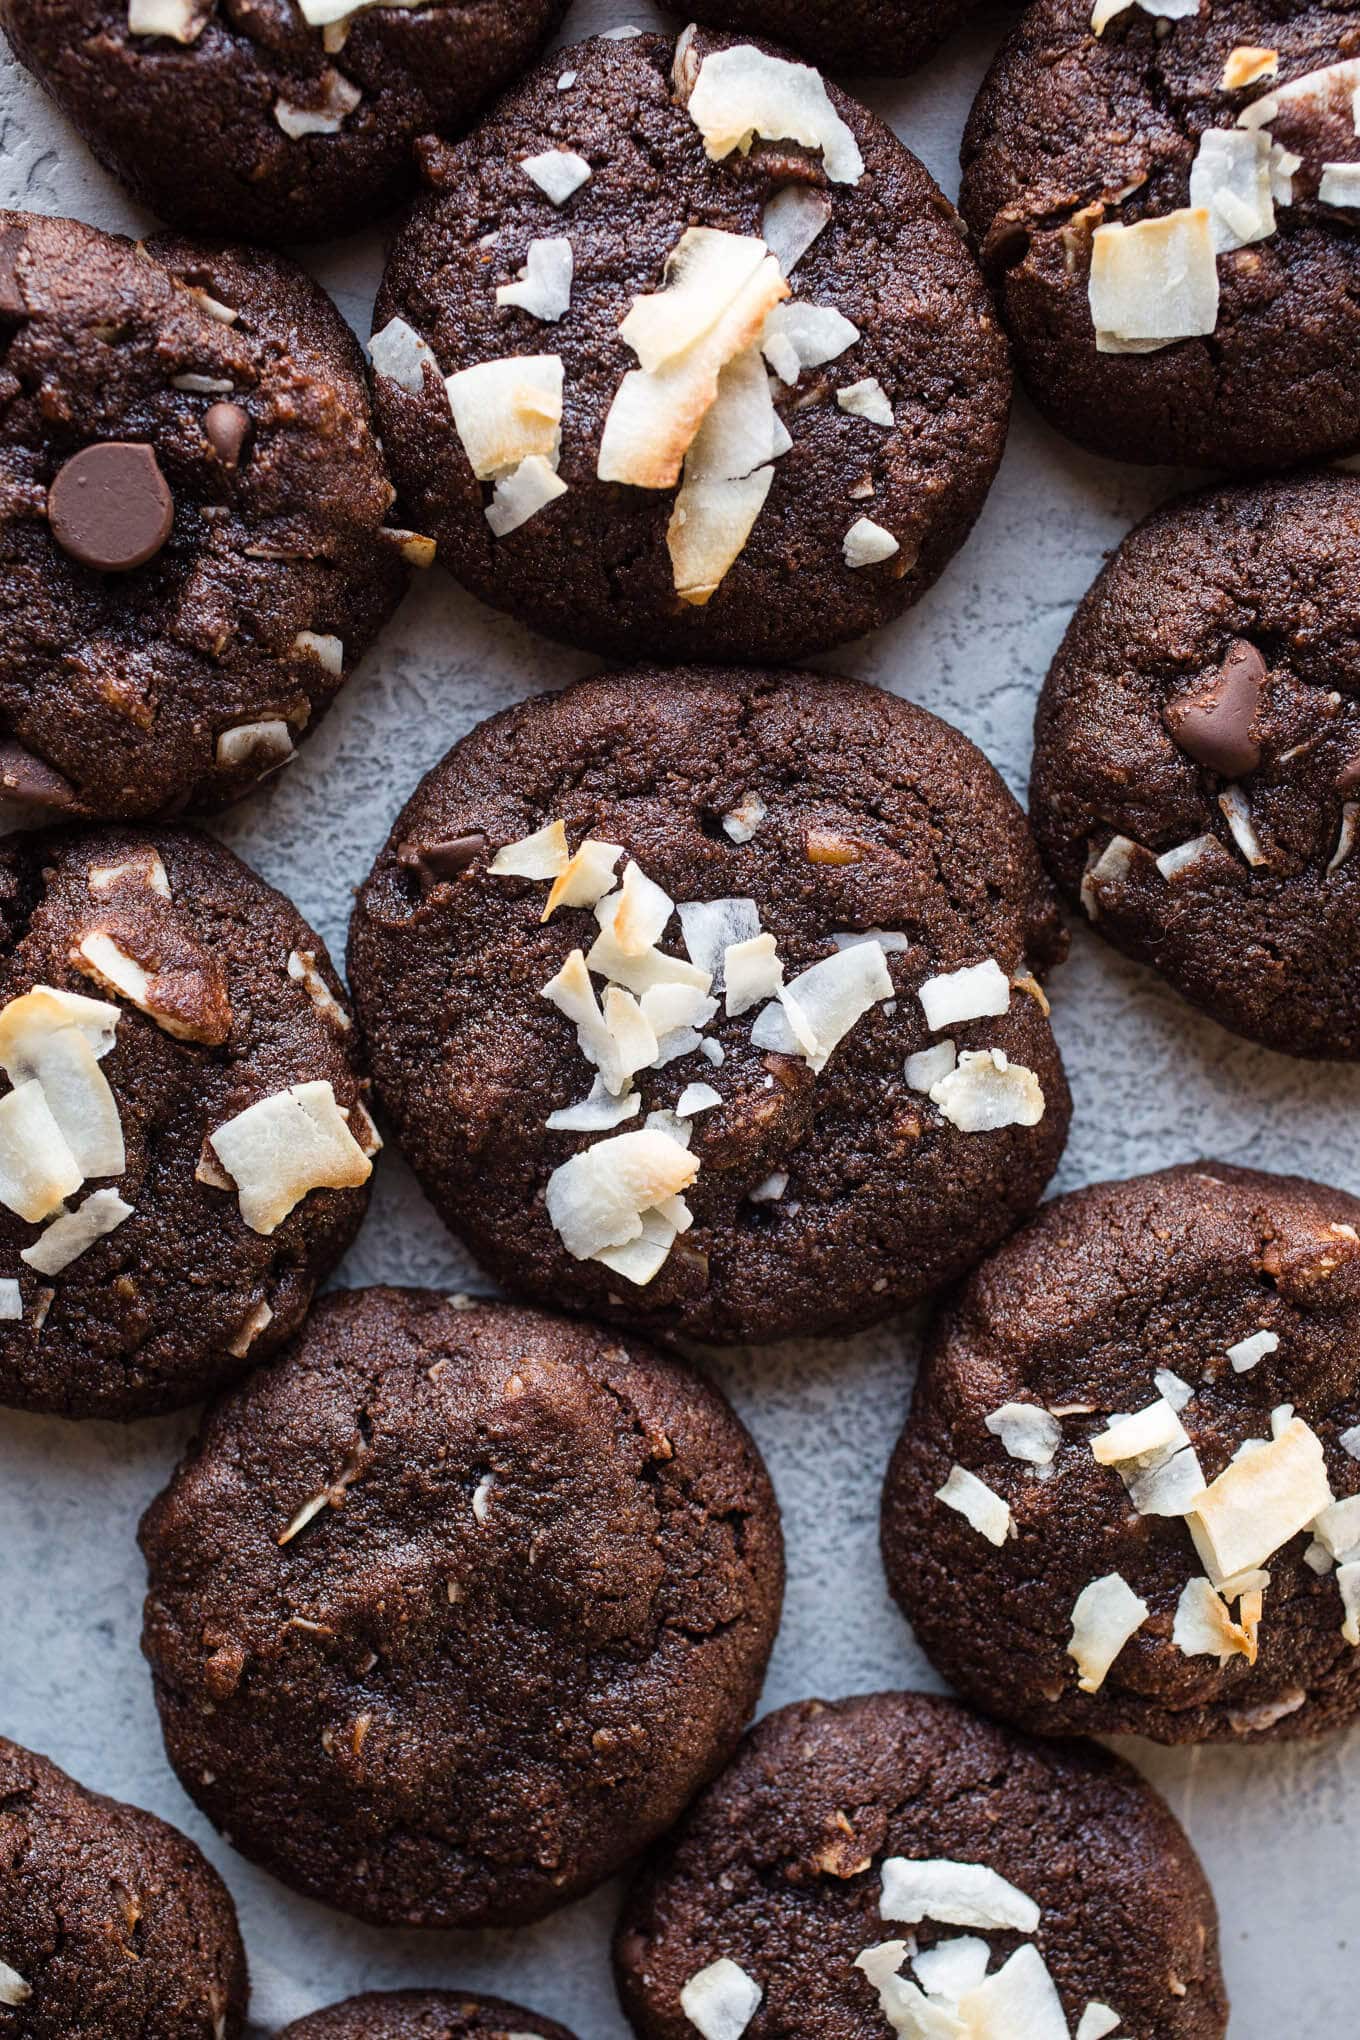 Double Chocolate Coconut Pecan Cookies are rich, chocolatey, and loaded with flaked coconut, pecans, and chocolate chips. Gluten-free, paleo, dairy-free.